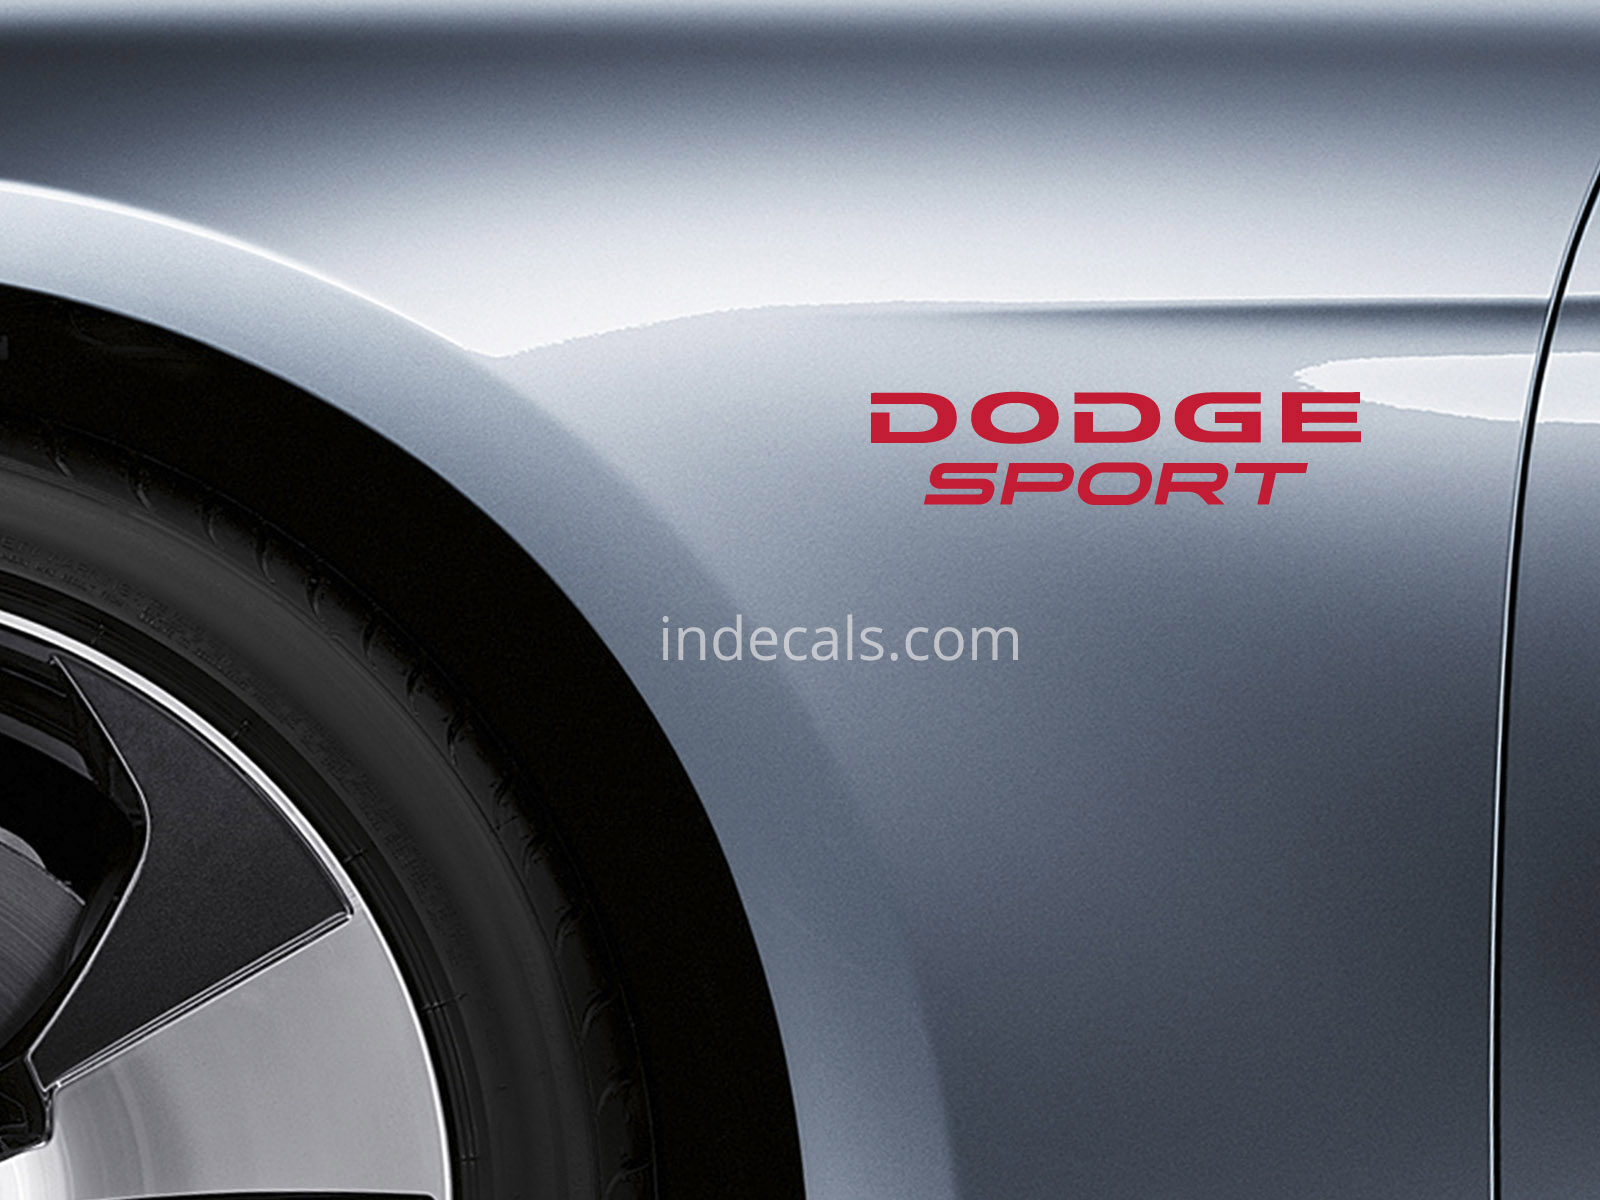 2 x Dodge Sports stickers for Wings - Red